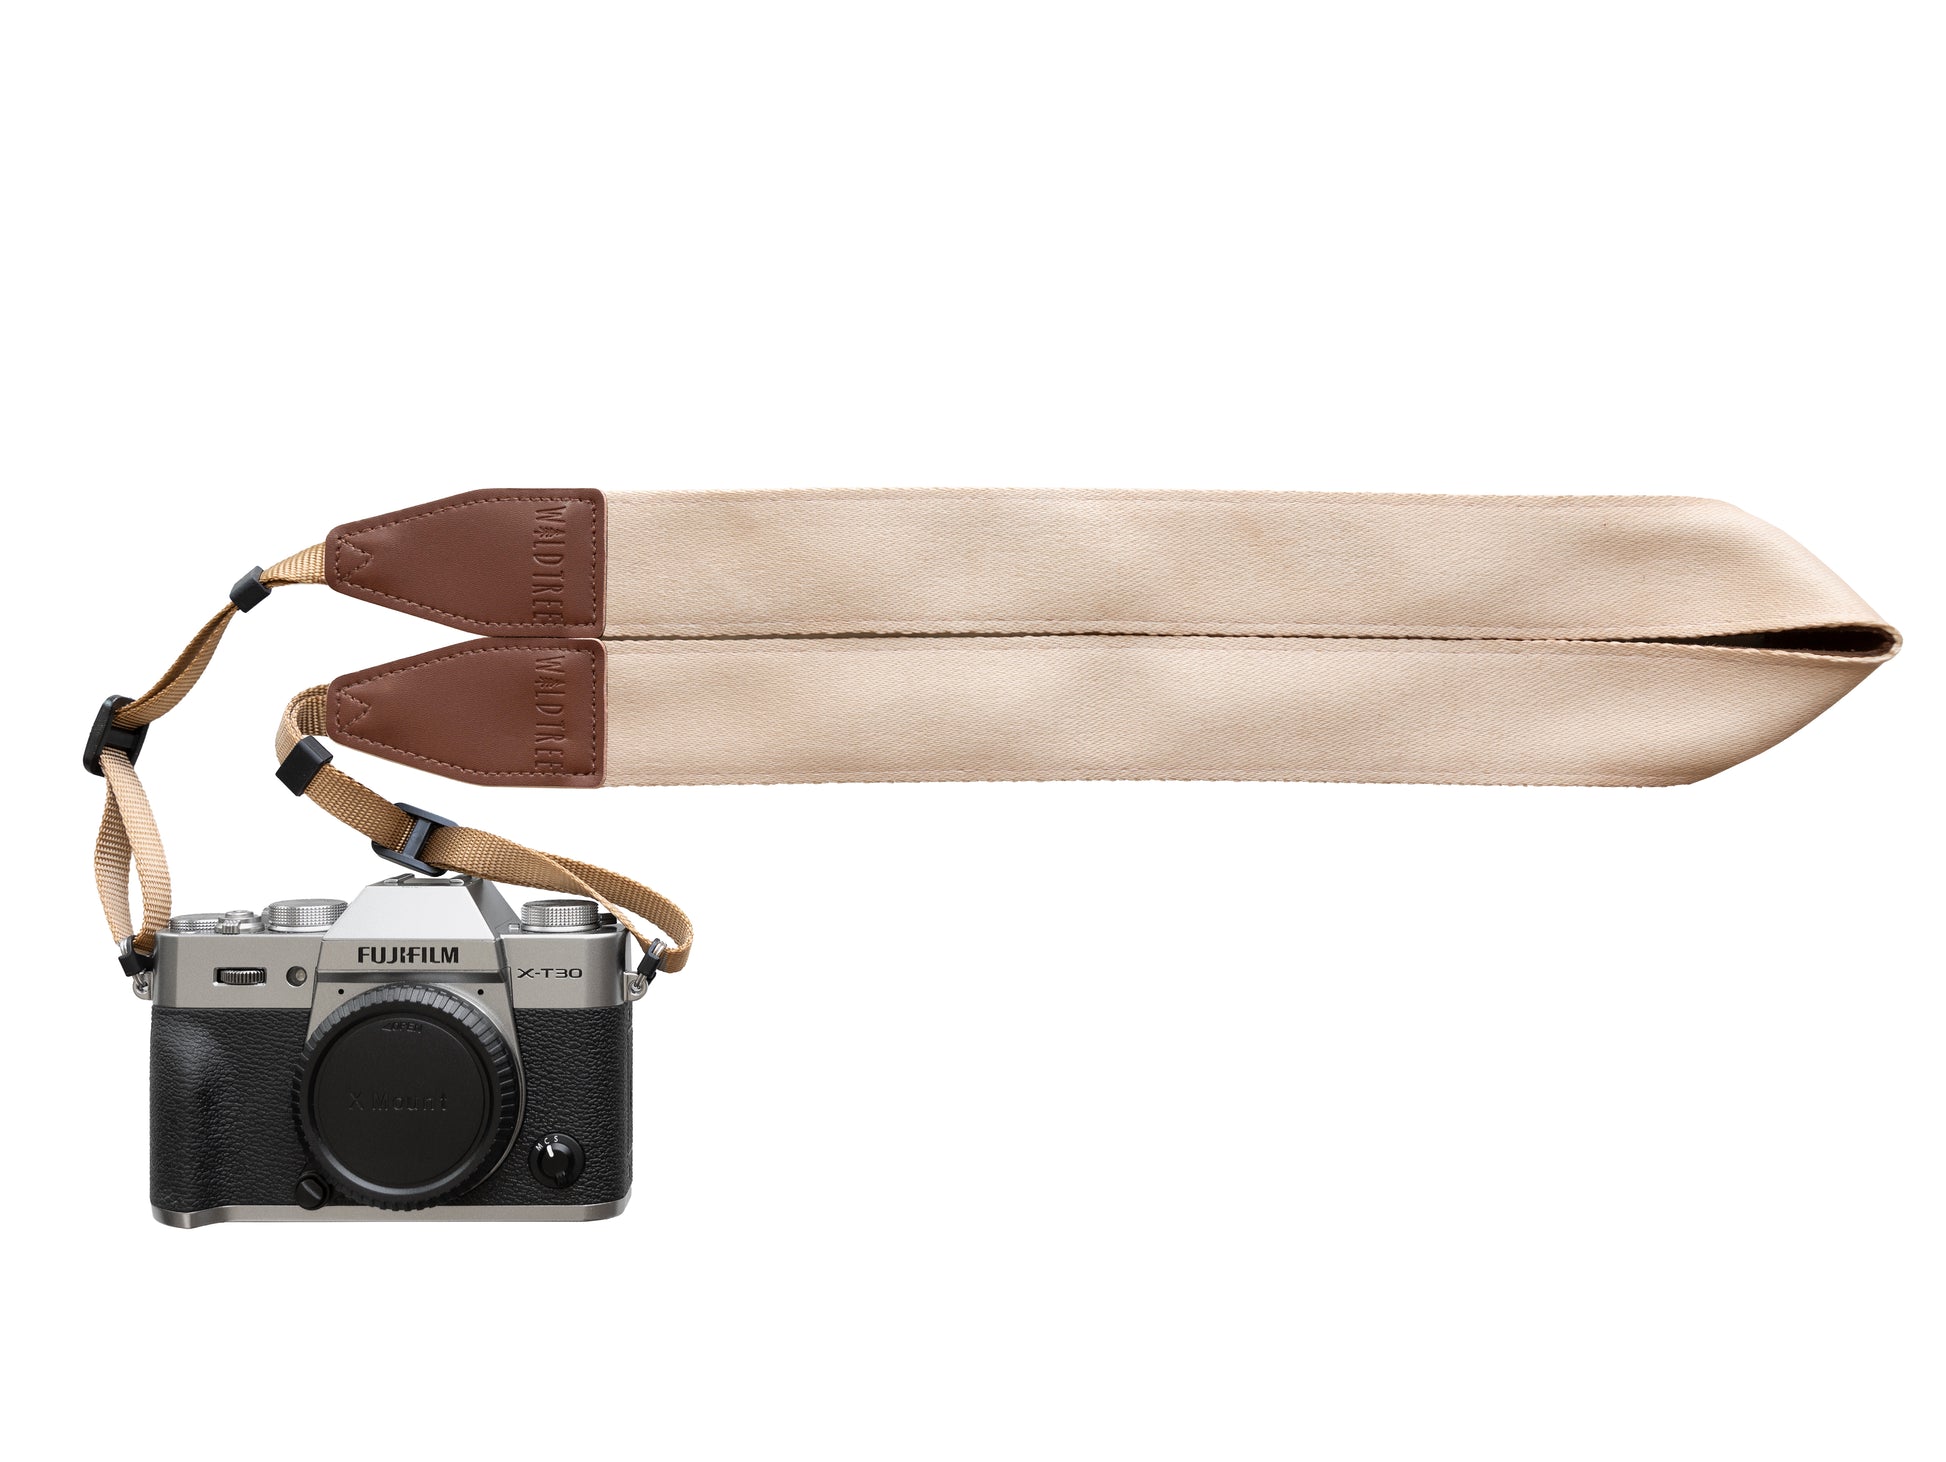 Wildtree Desert Sand colored Camera strap connected to camera